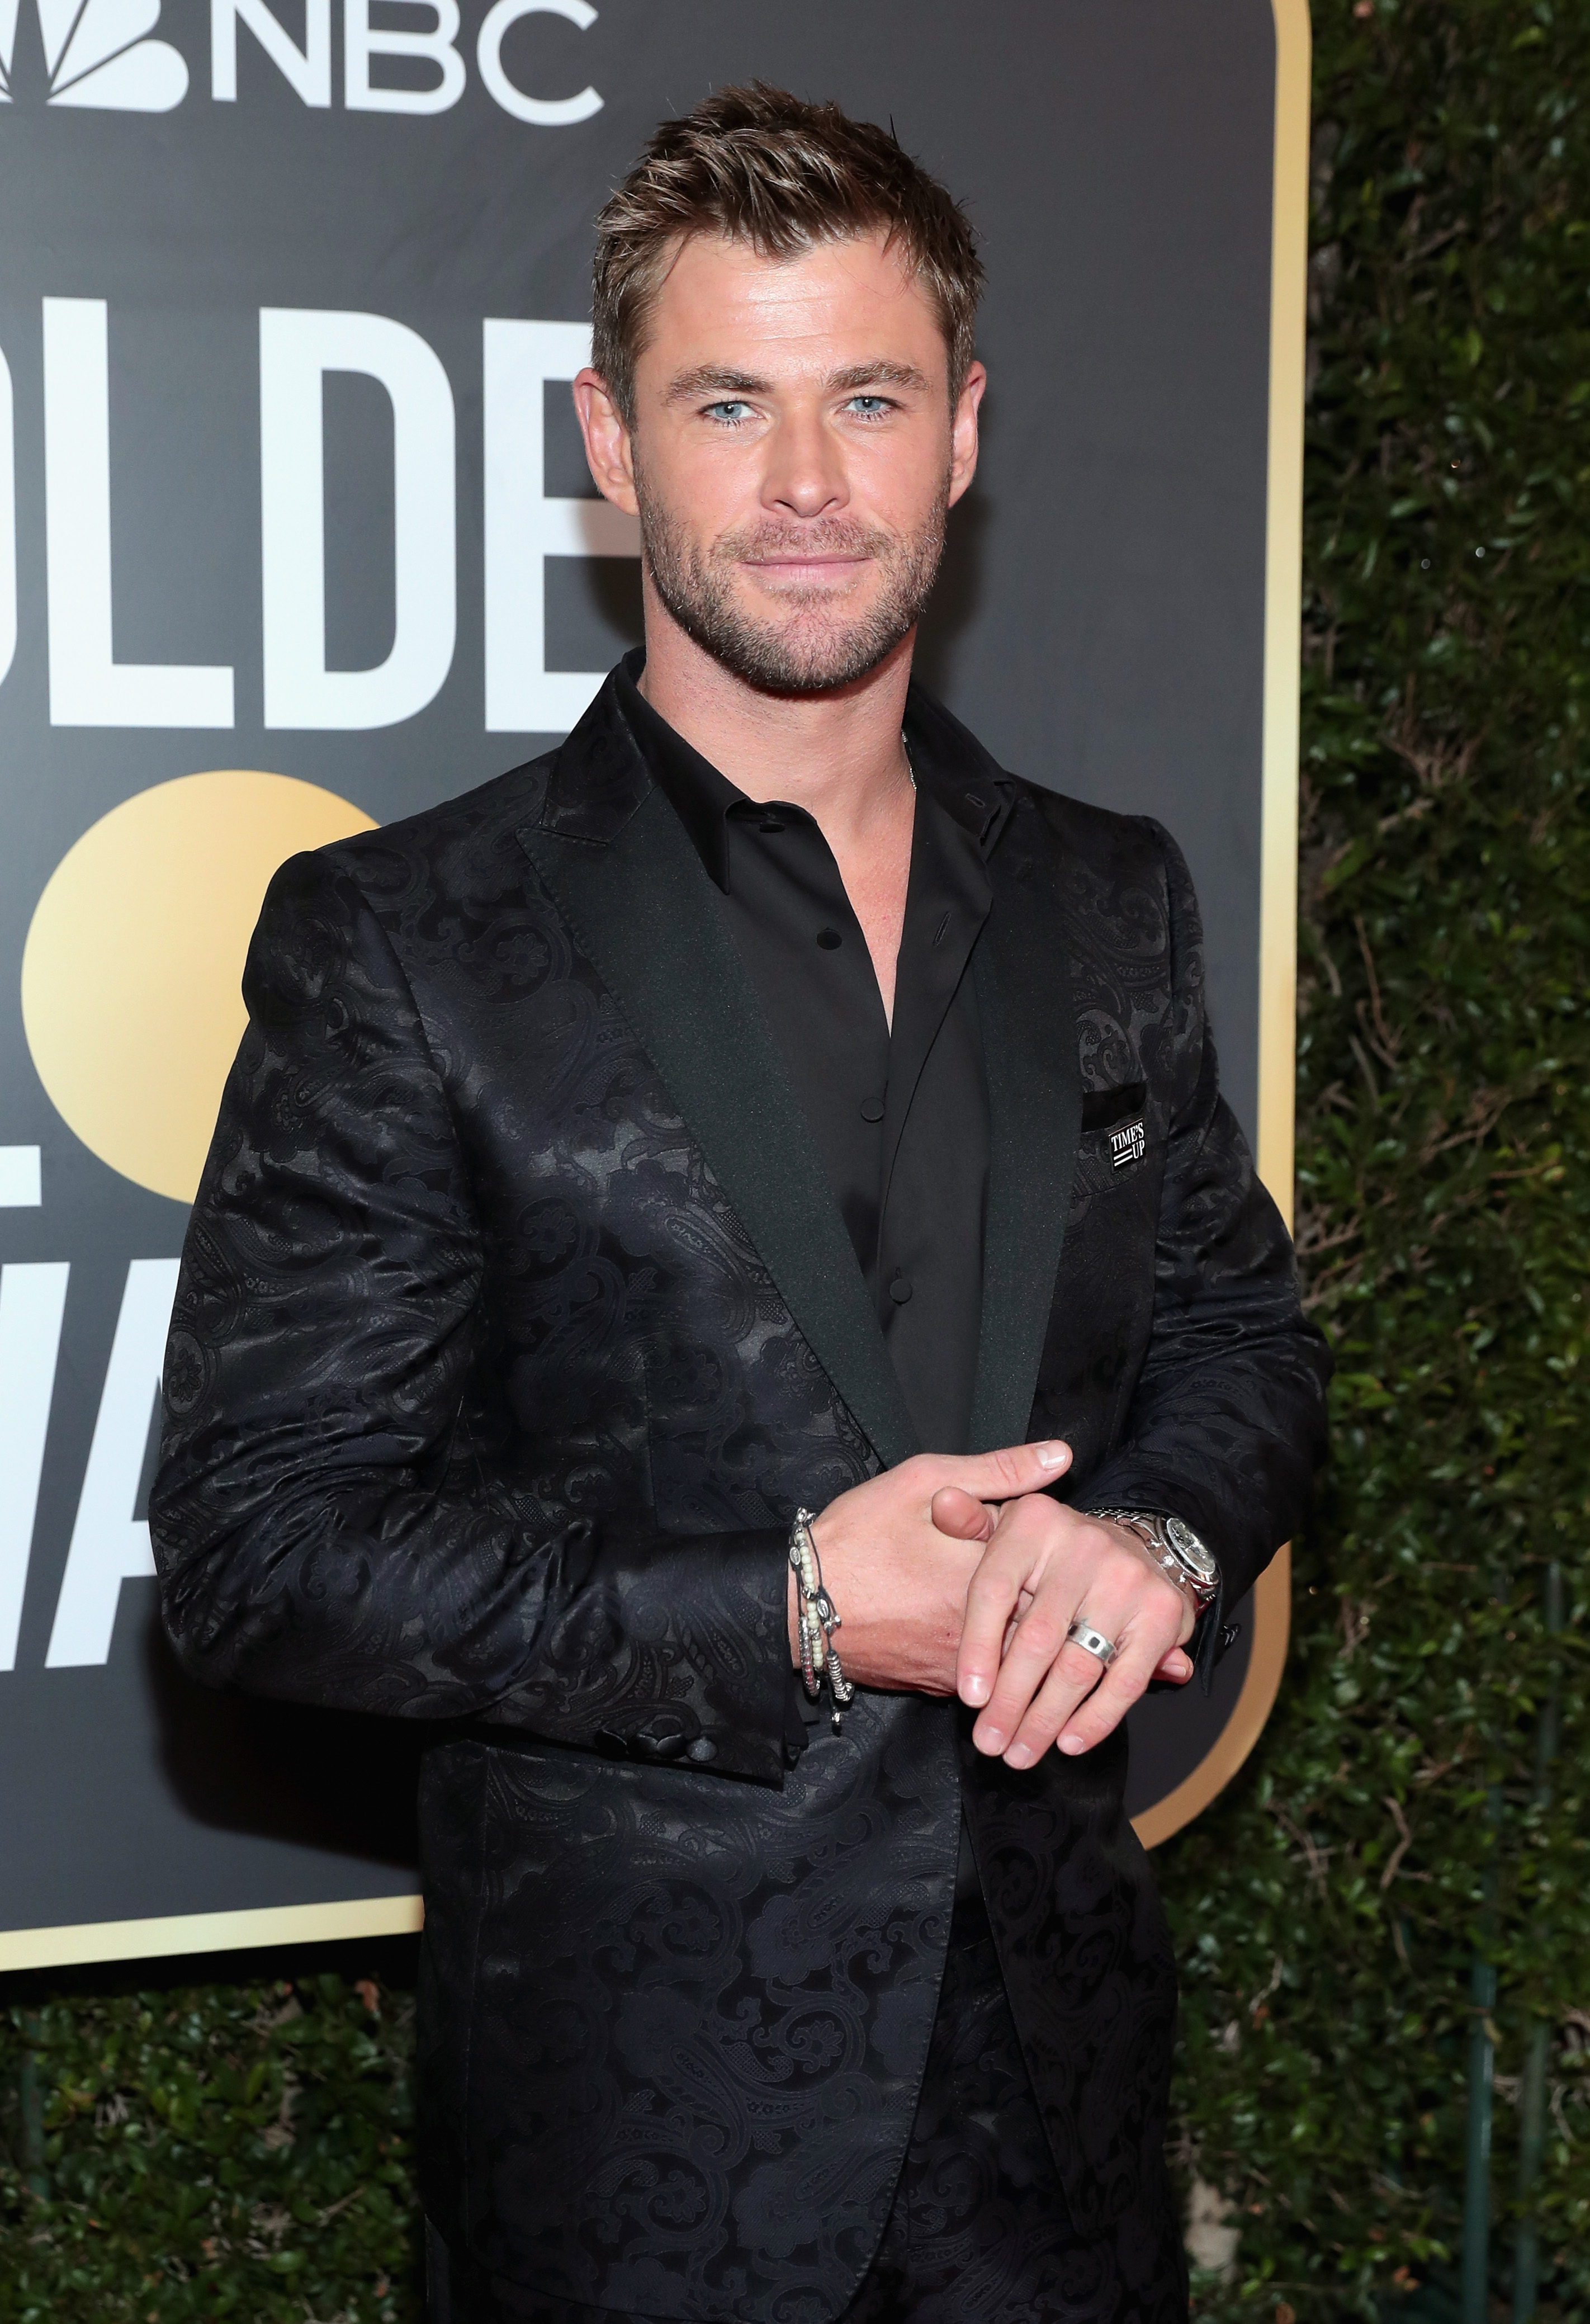 Chris Hemsworth arrives to the 75th Annual Golden Globe Awards held at the Beverly Hilton Hotel on January 7, 2018. (Neilson Barnard/NBCUniversal—NBCU Photo Bank via Getty Images)